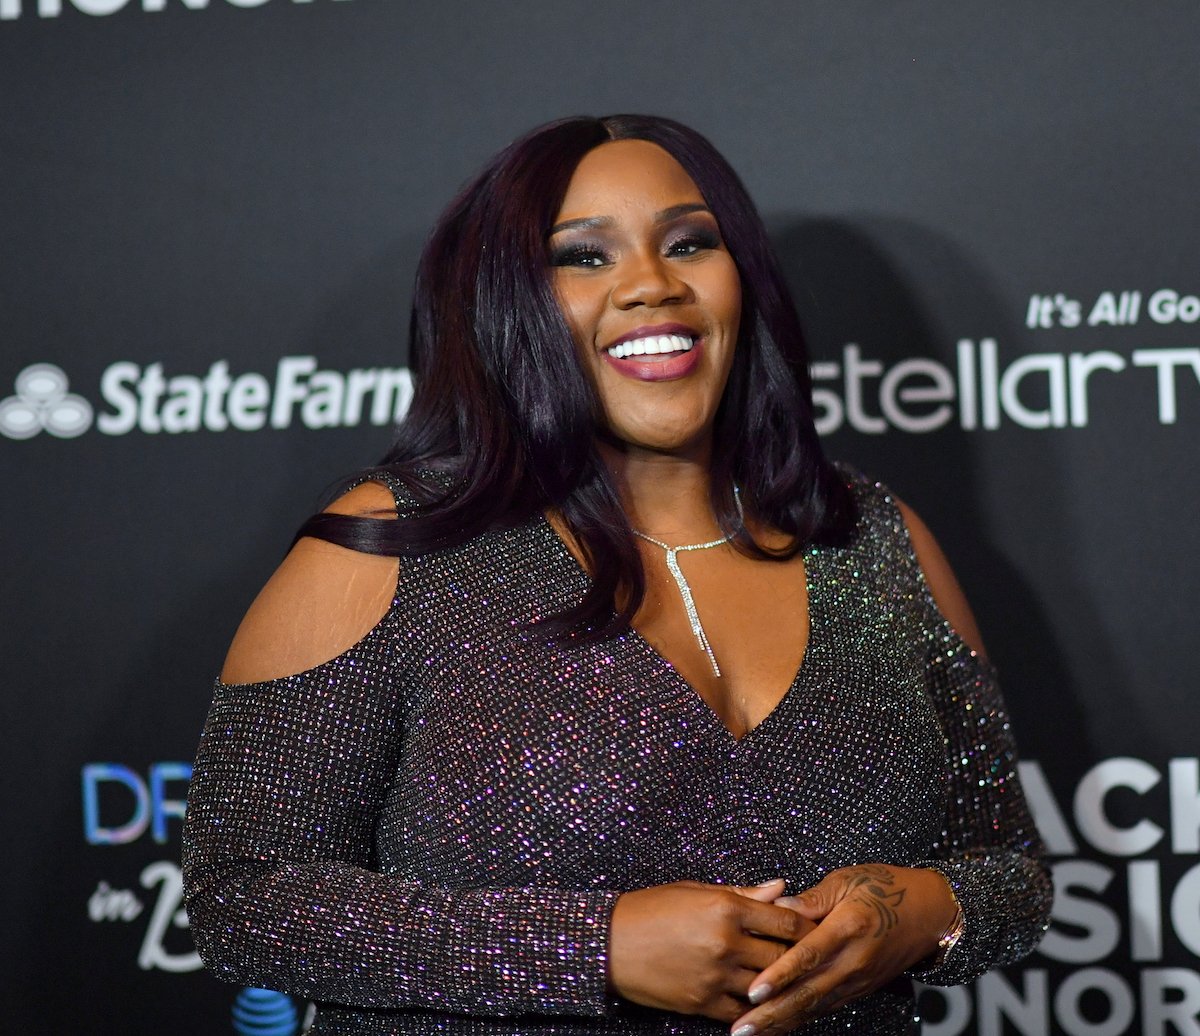 Everything We Know About the Bizarre Kelly Price Disappearance and Resurgence Story